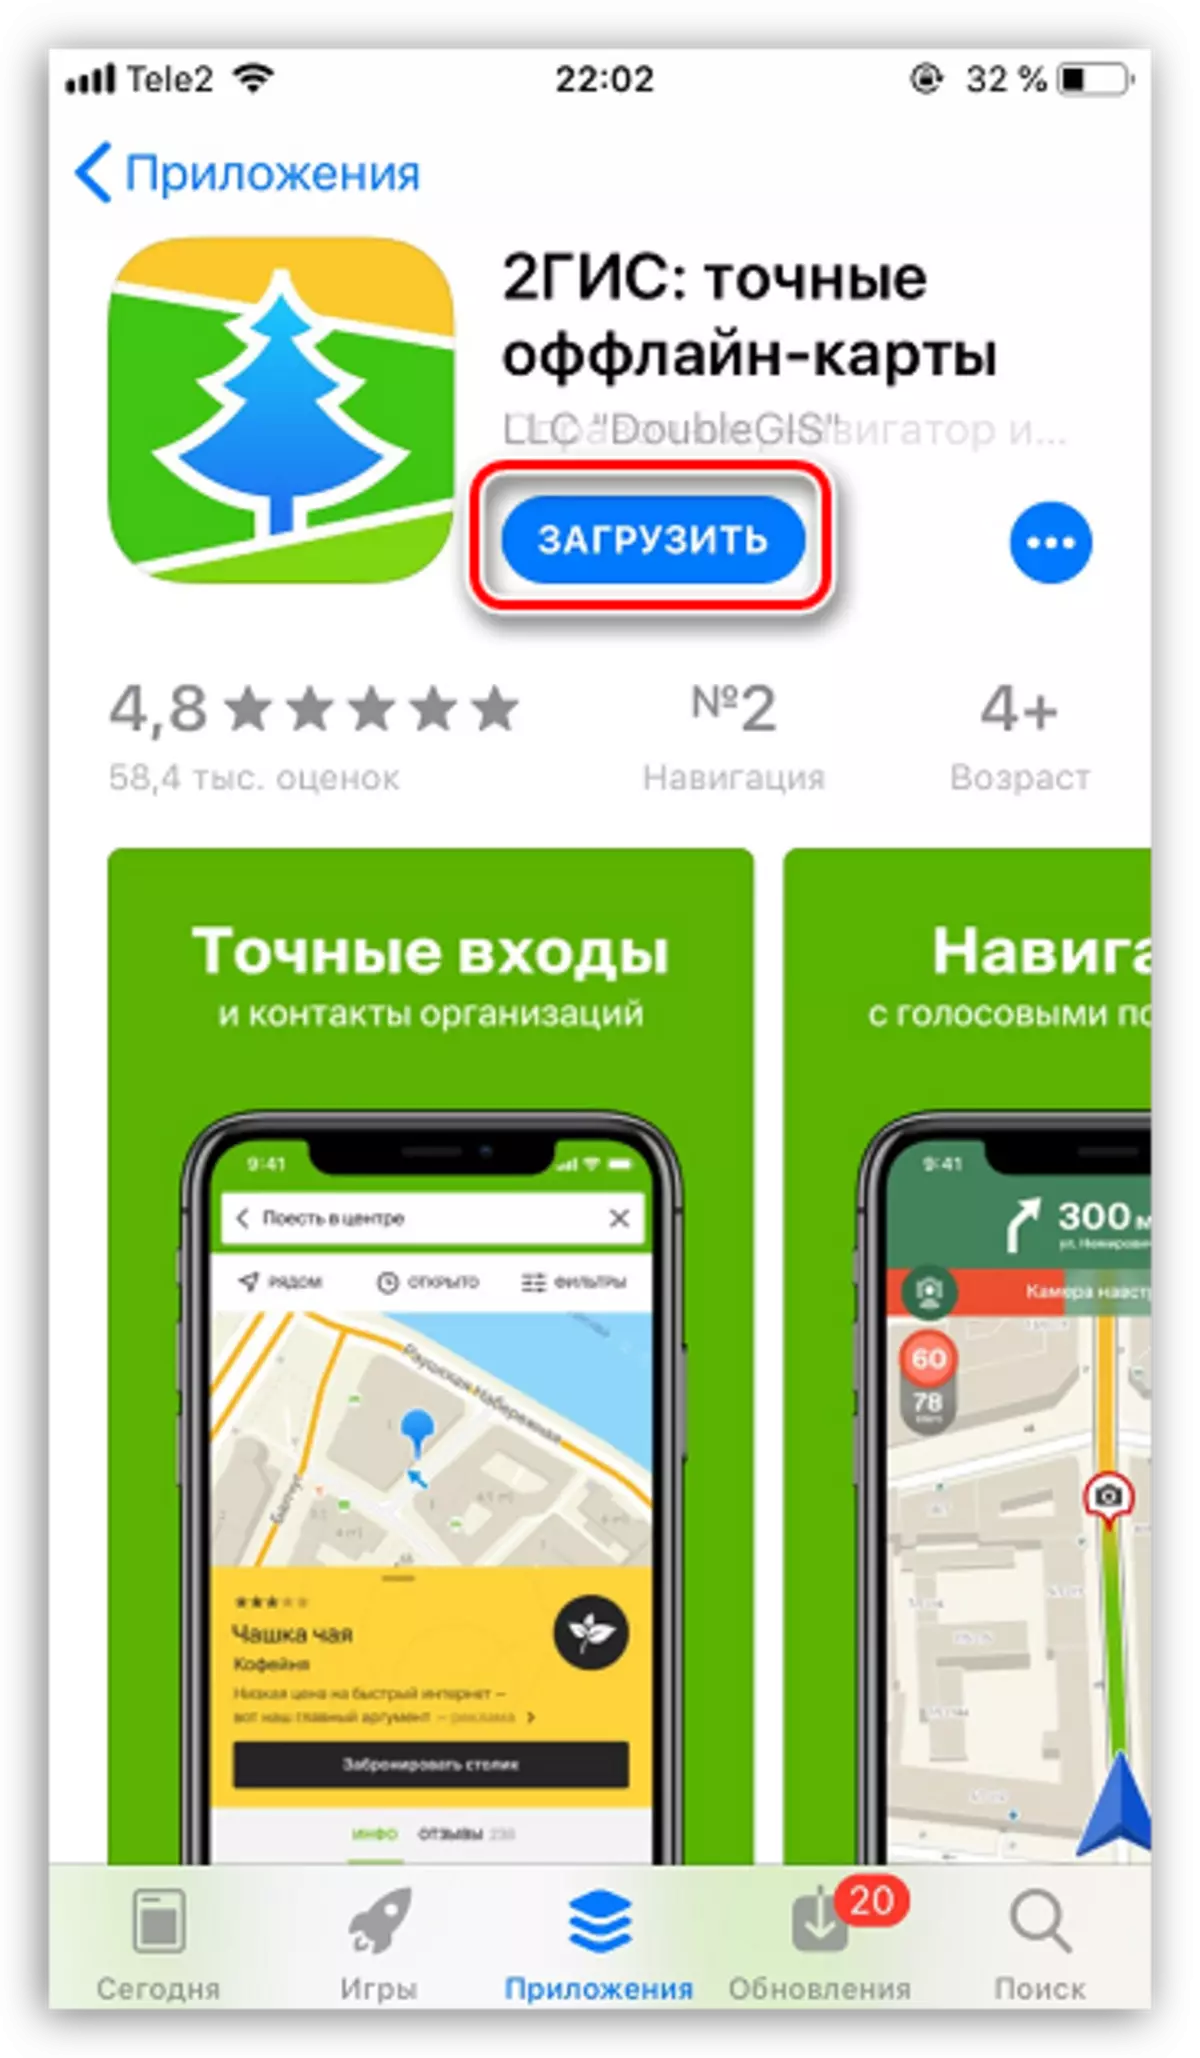 Барномаҳои Dection Aut Store дар iPhone